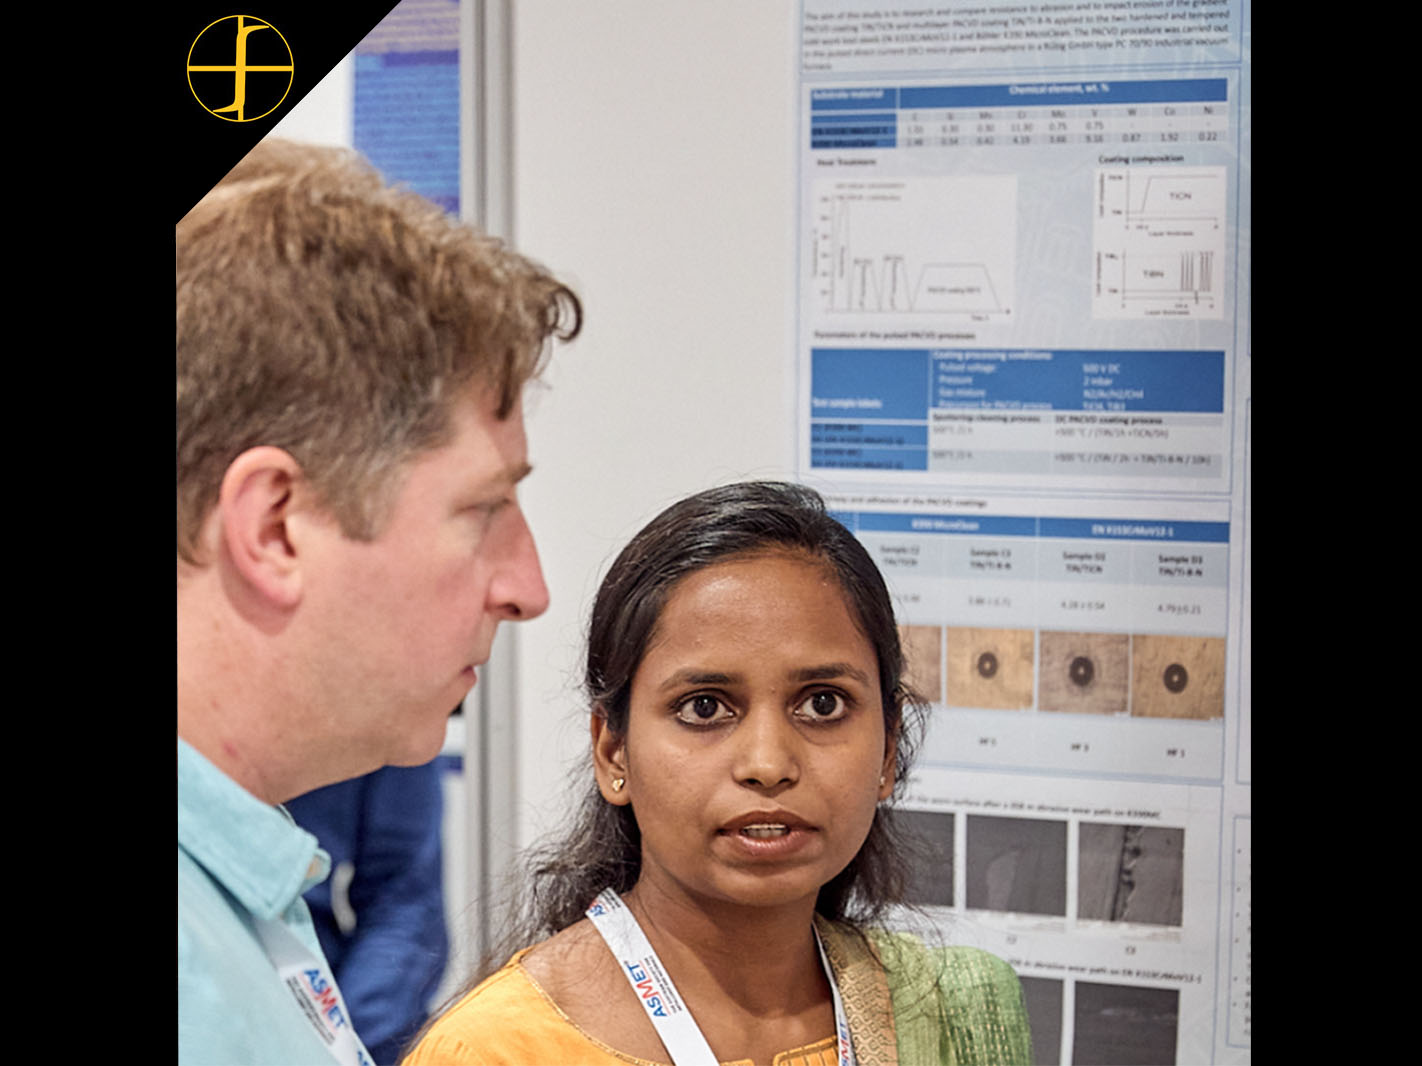 Fluxtrol Inc. Sponsors Heat Treatment Poster Competition at the 2022 IFHTSE World Congress in Austria